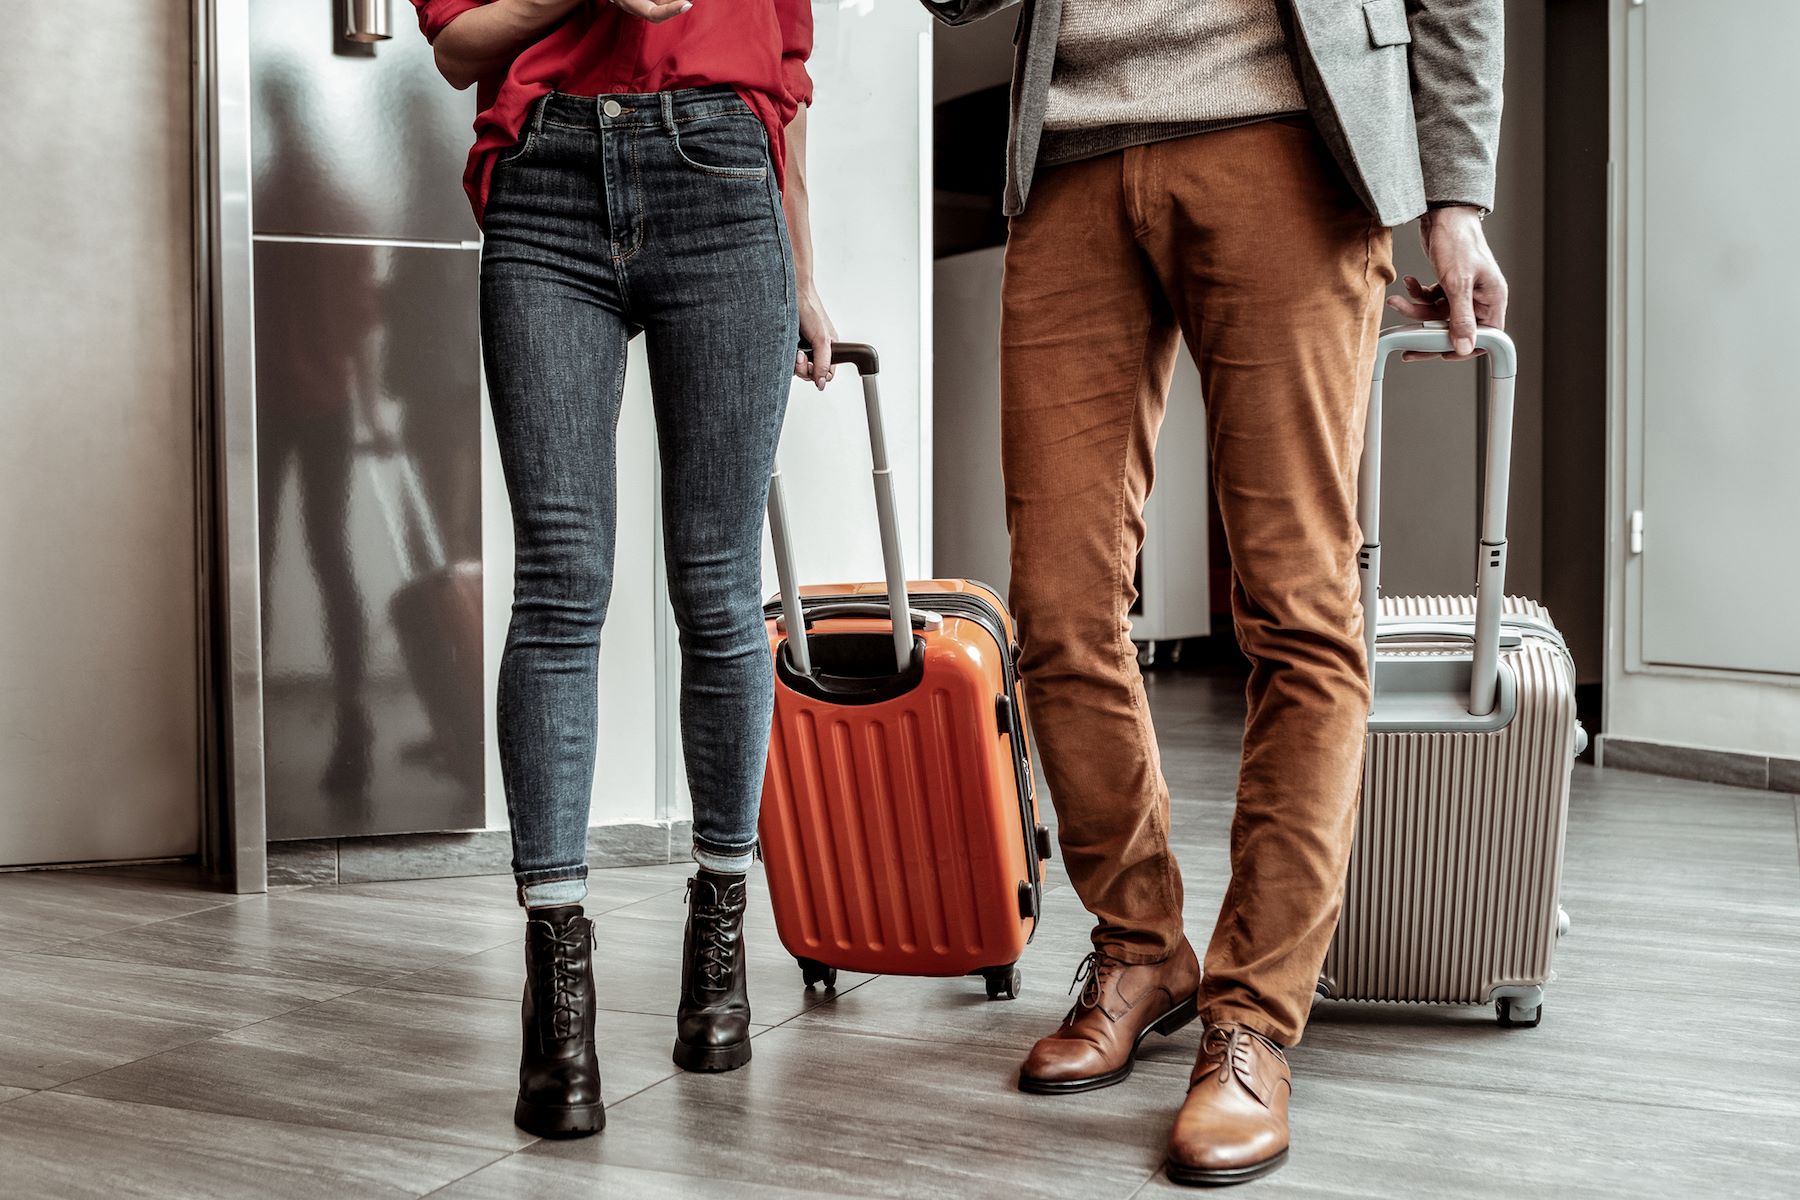 Couple with suitcases